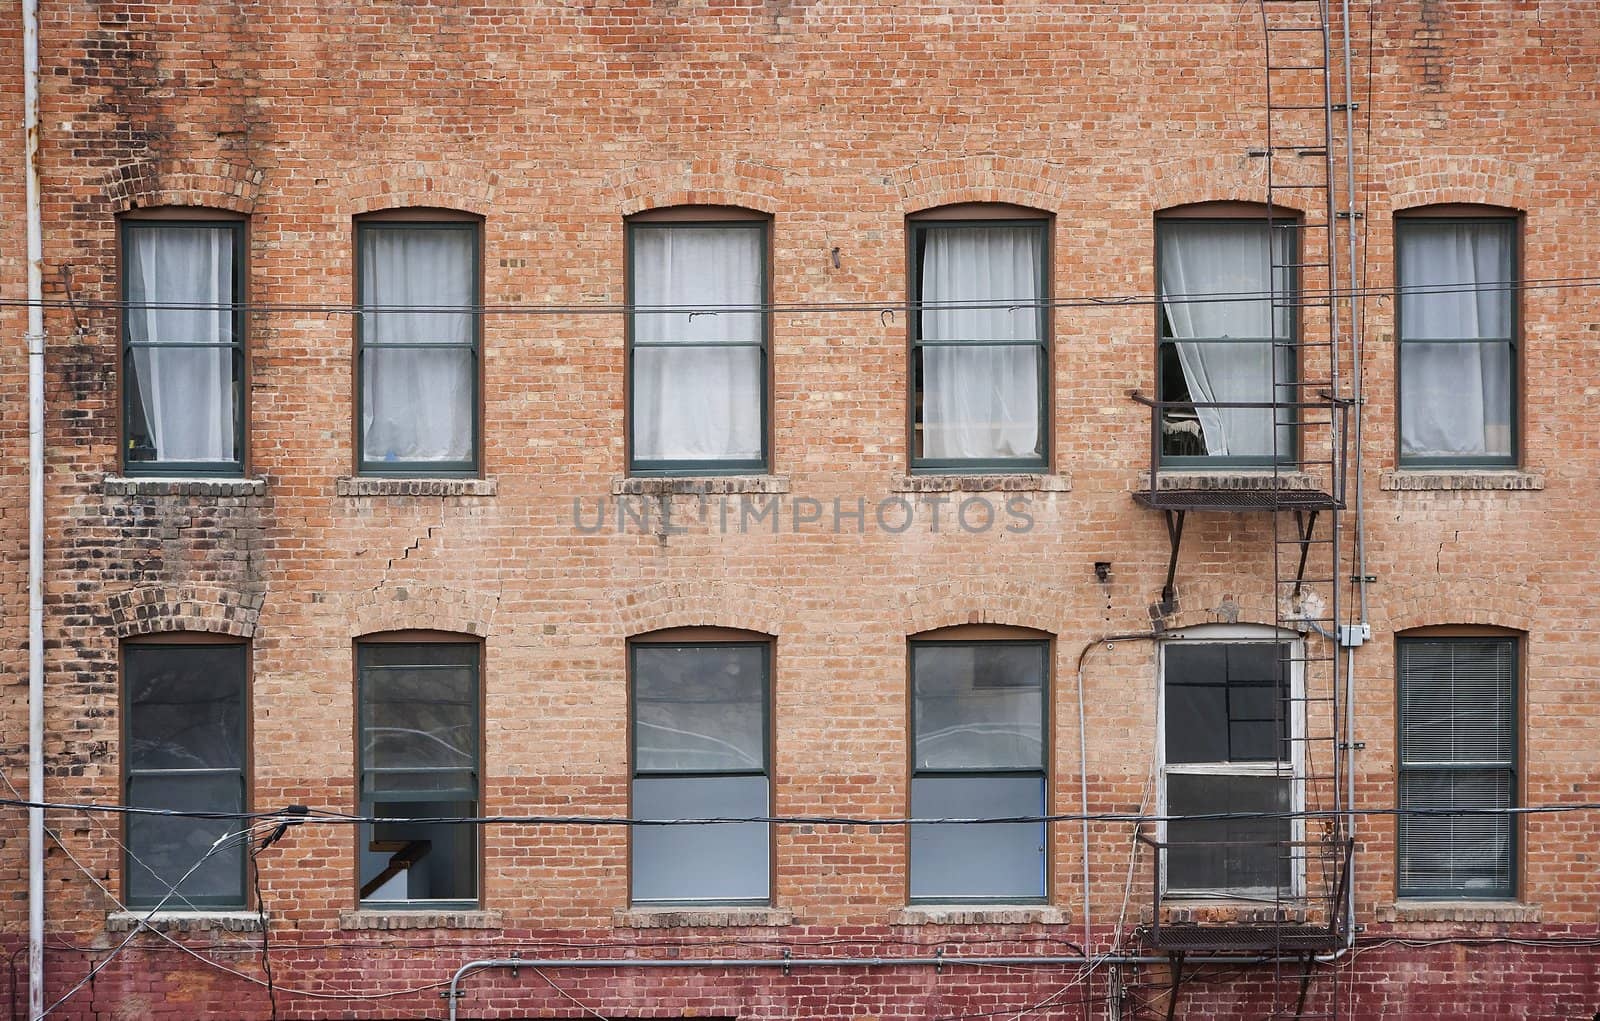 Many windows on a brick building from the 1800s in Bisbee Arizona